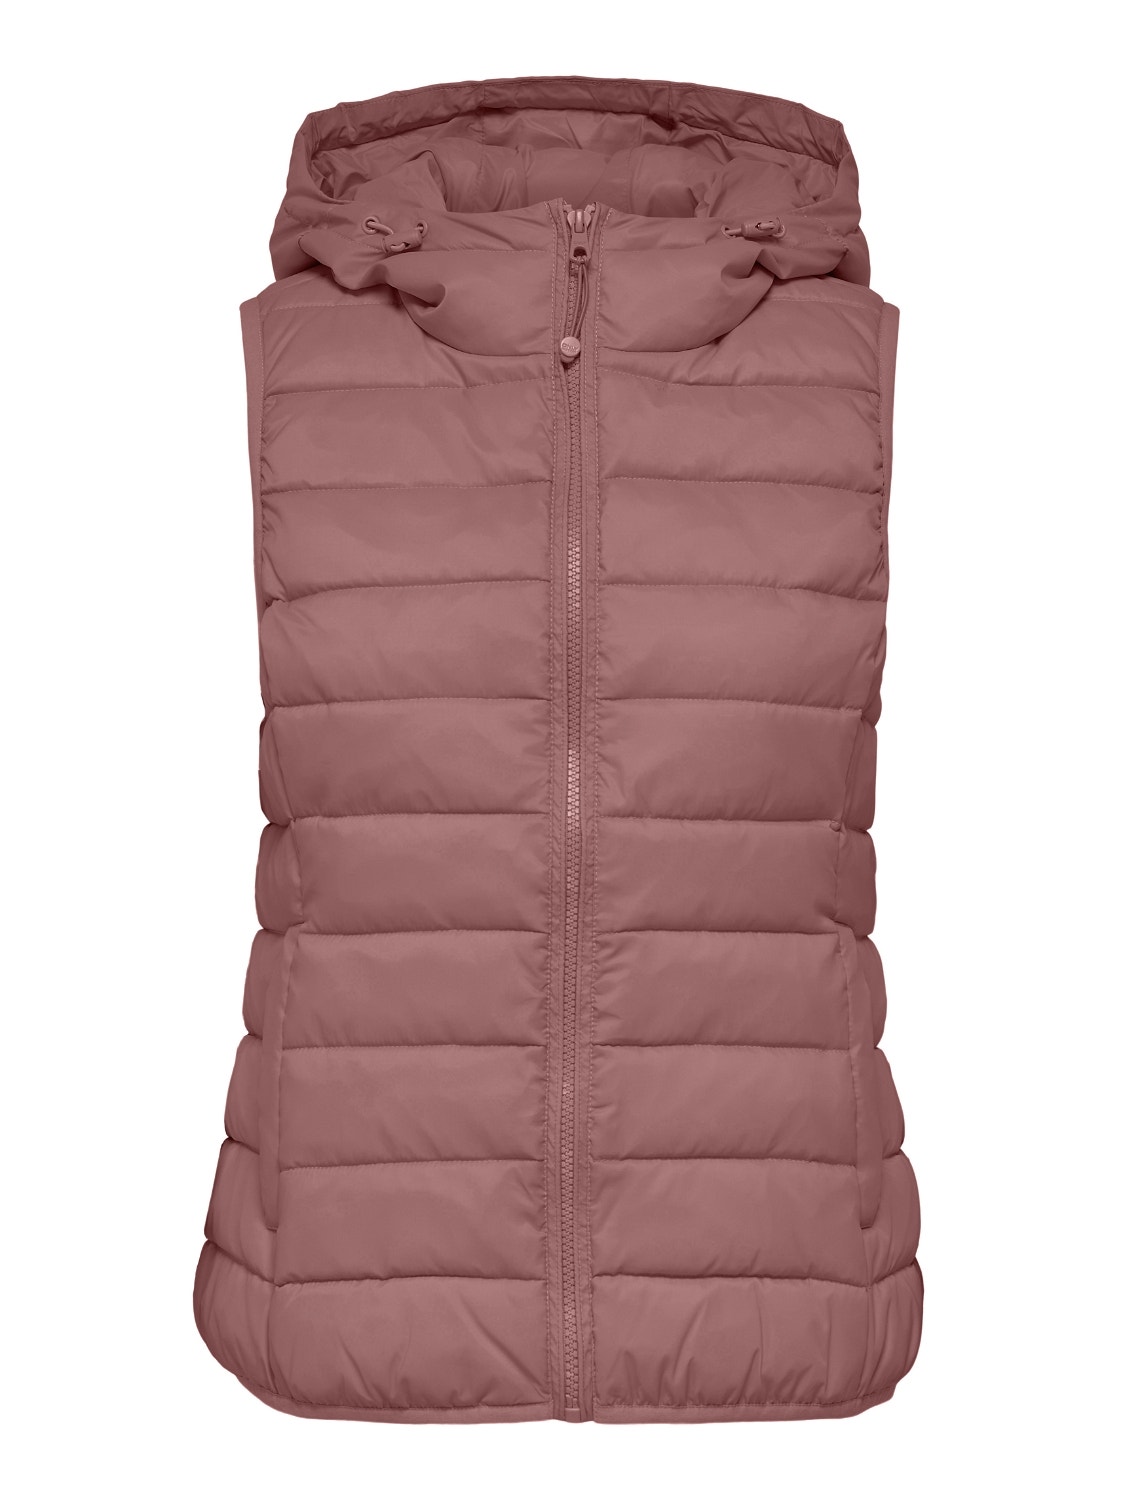 ONLY Vattert Vest -Withered Rose - 15205760